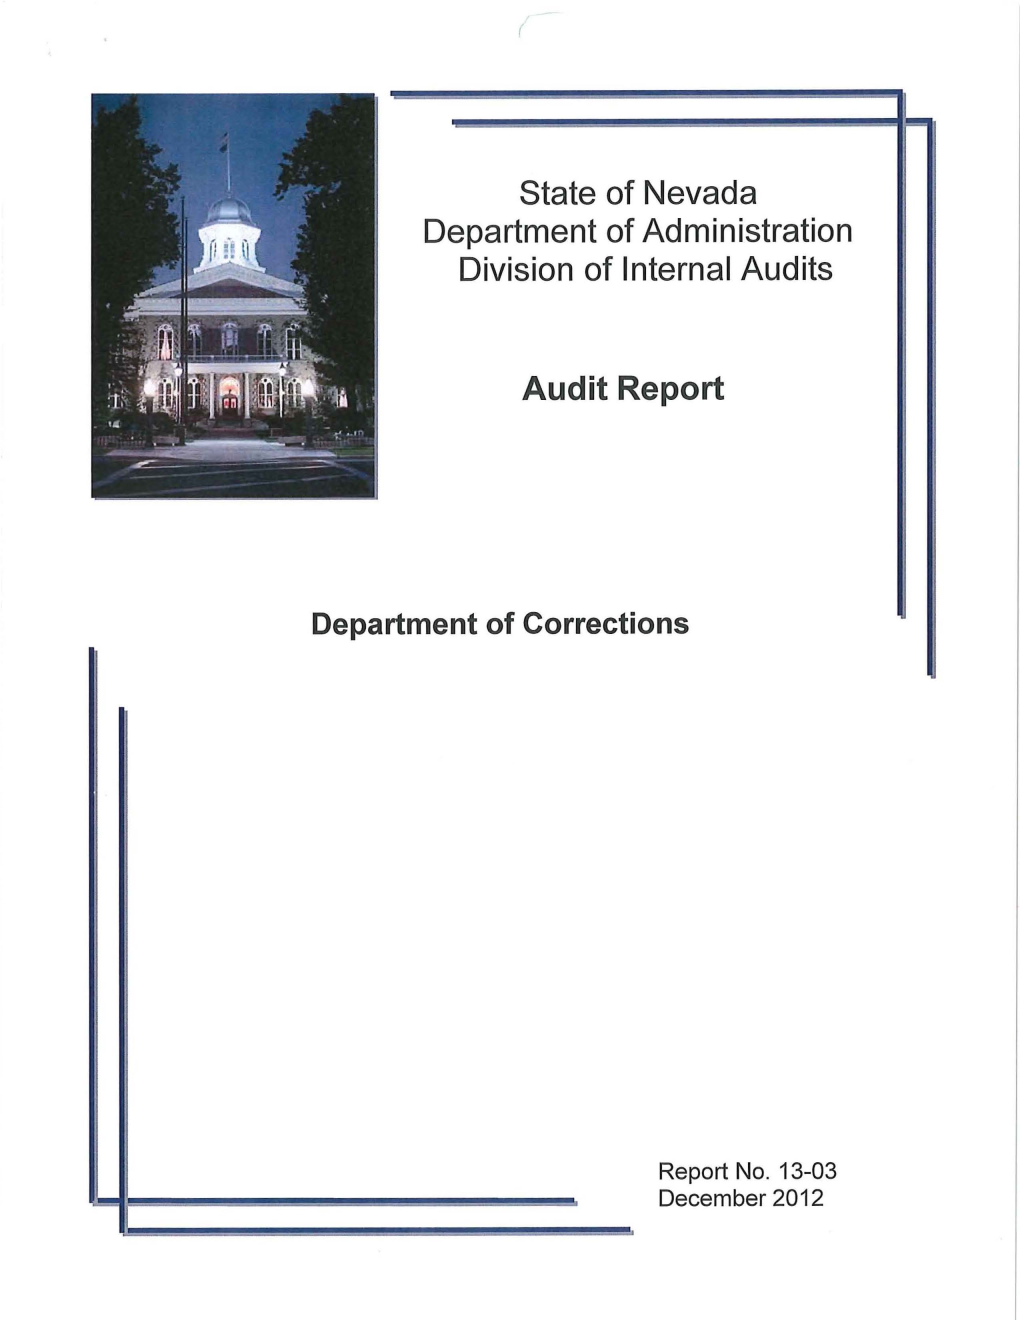 State of Nevada Department of Administration Division of Internal Audits